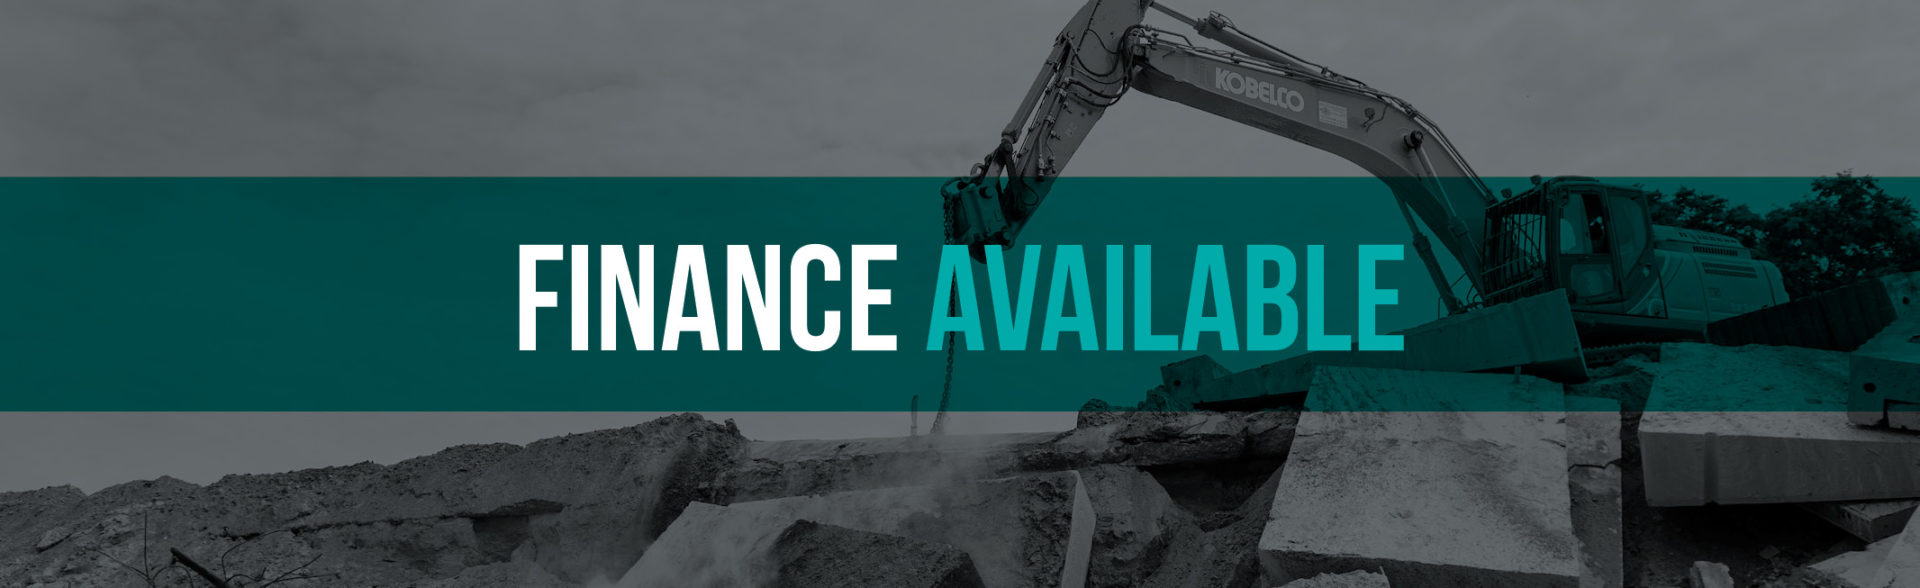 Equipment Finance Available